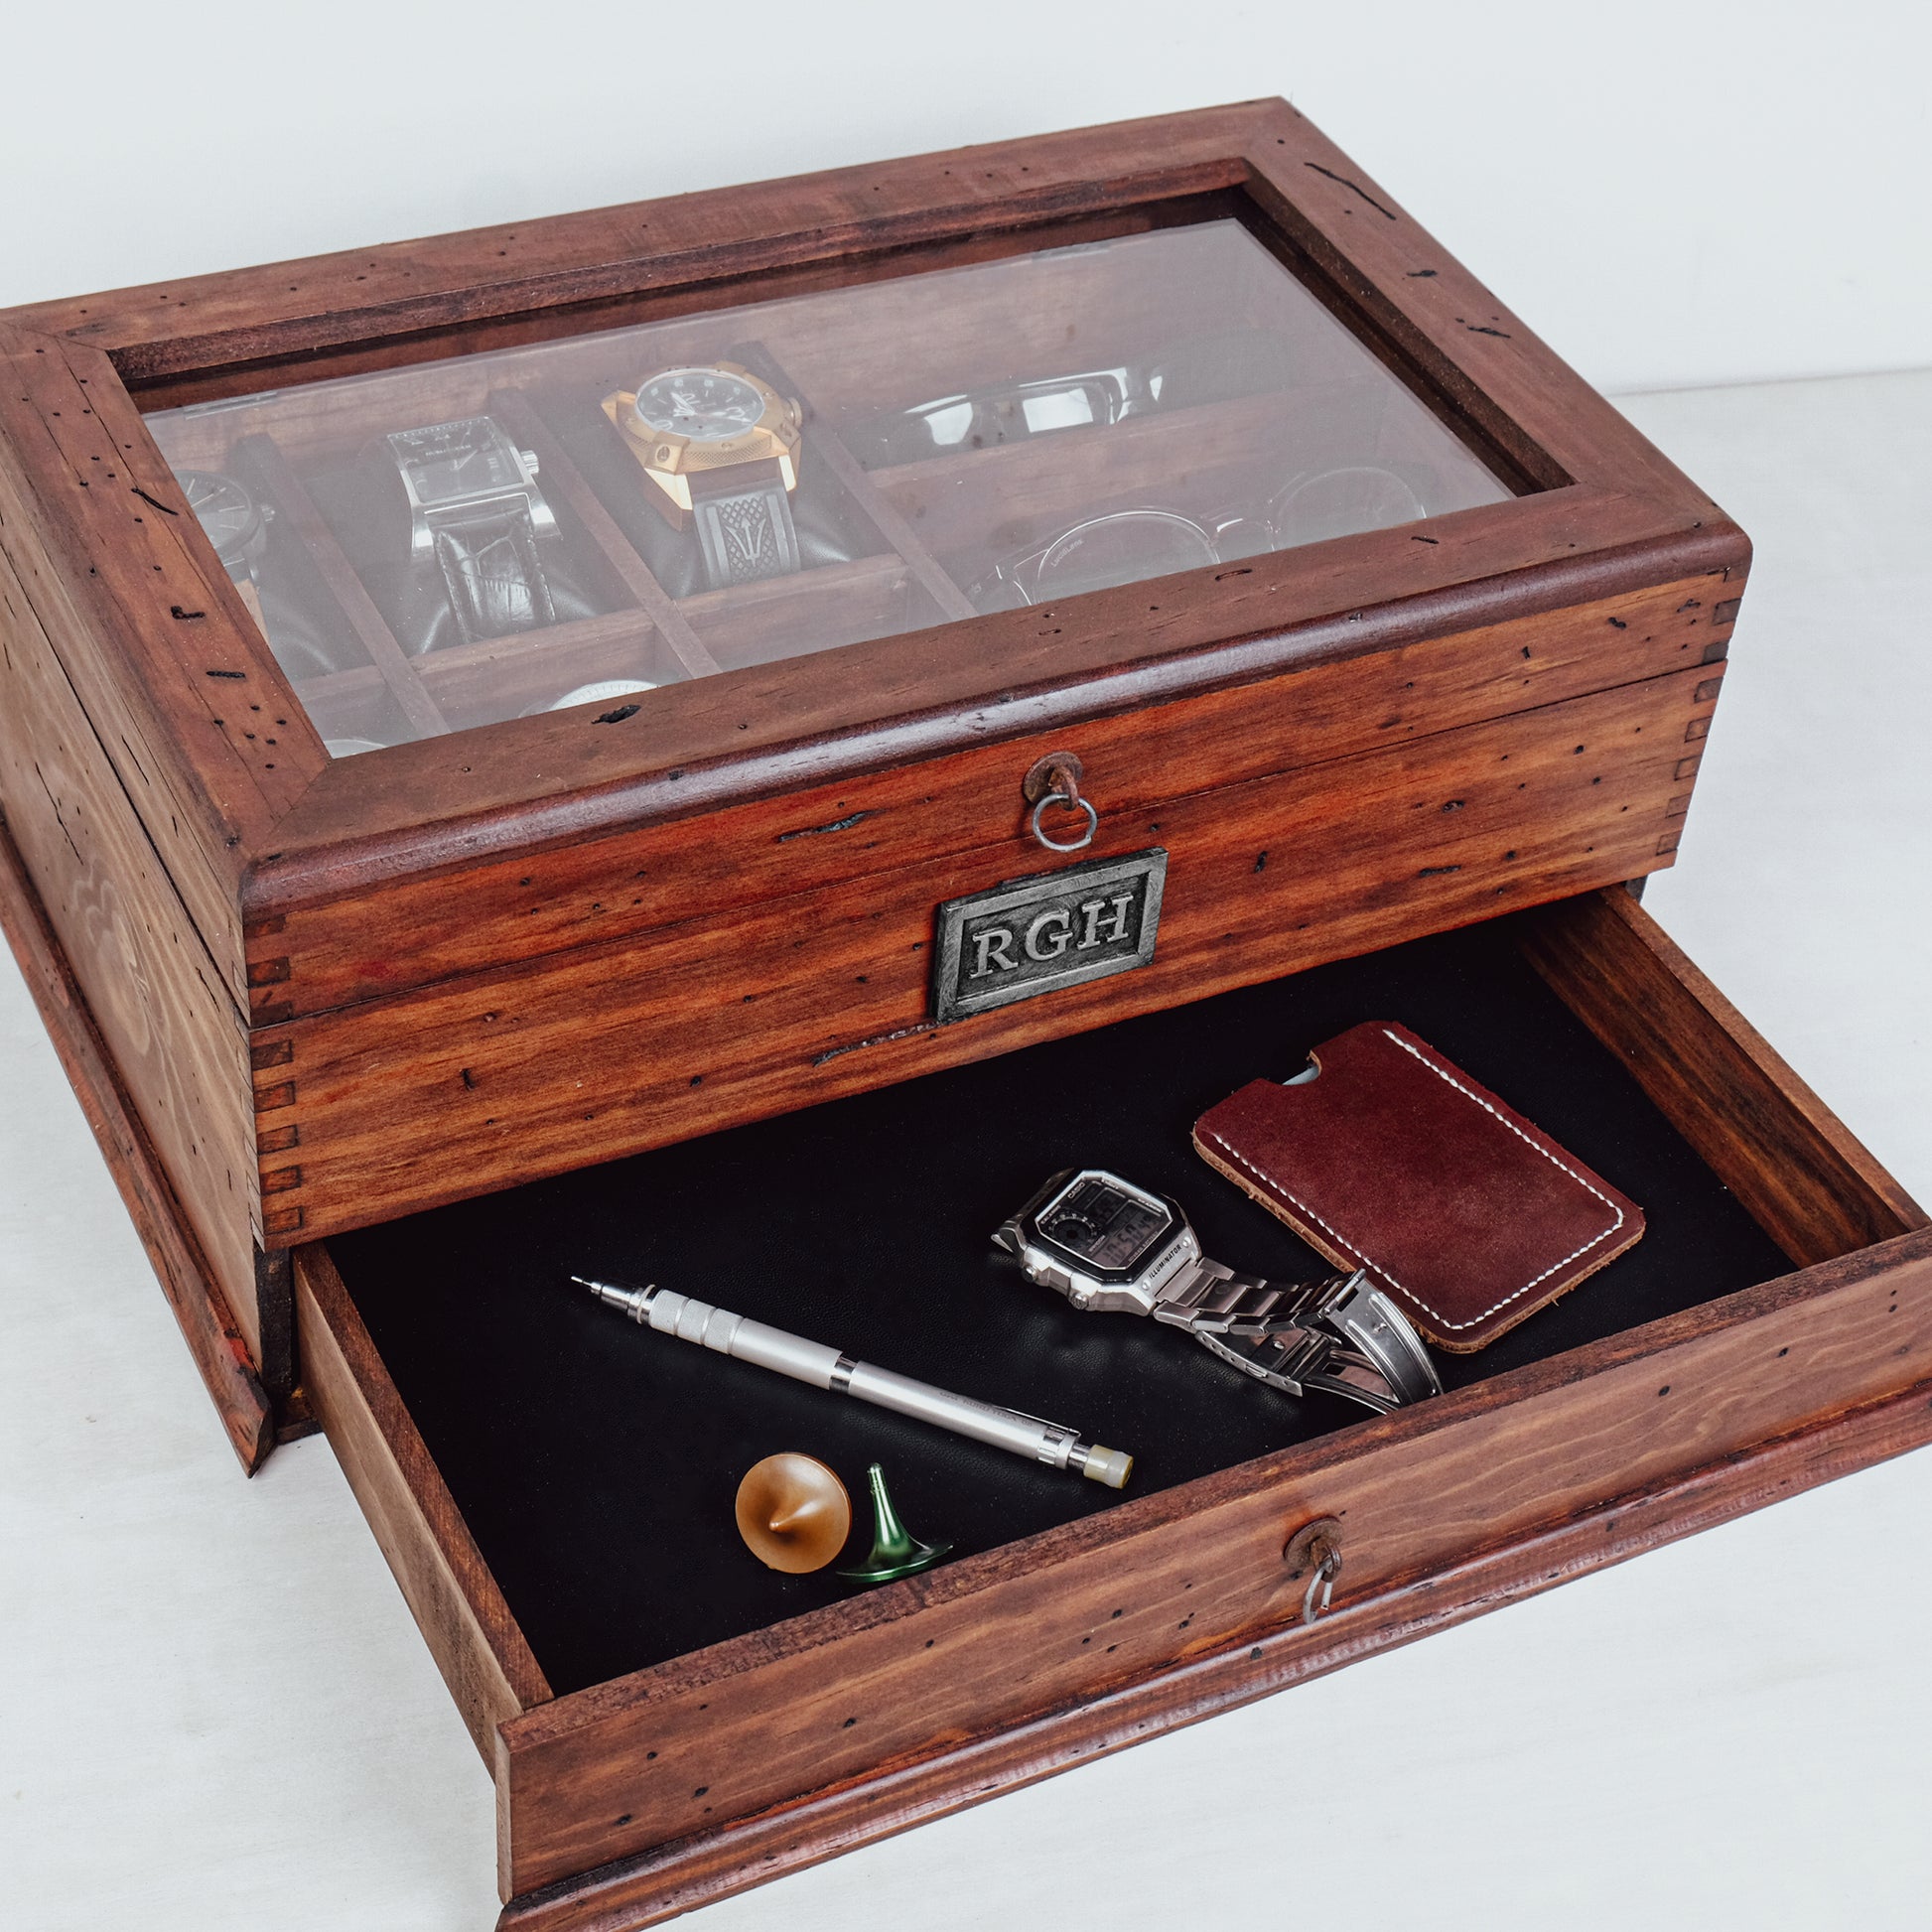 Three Drawer Watch Box for 16 Watches